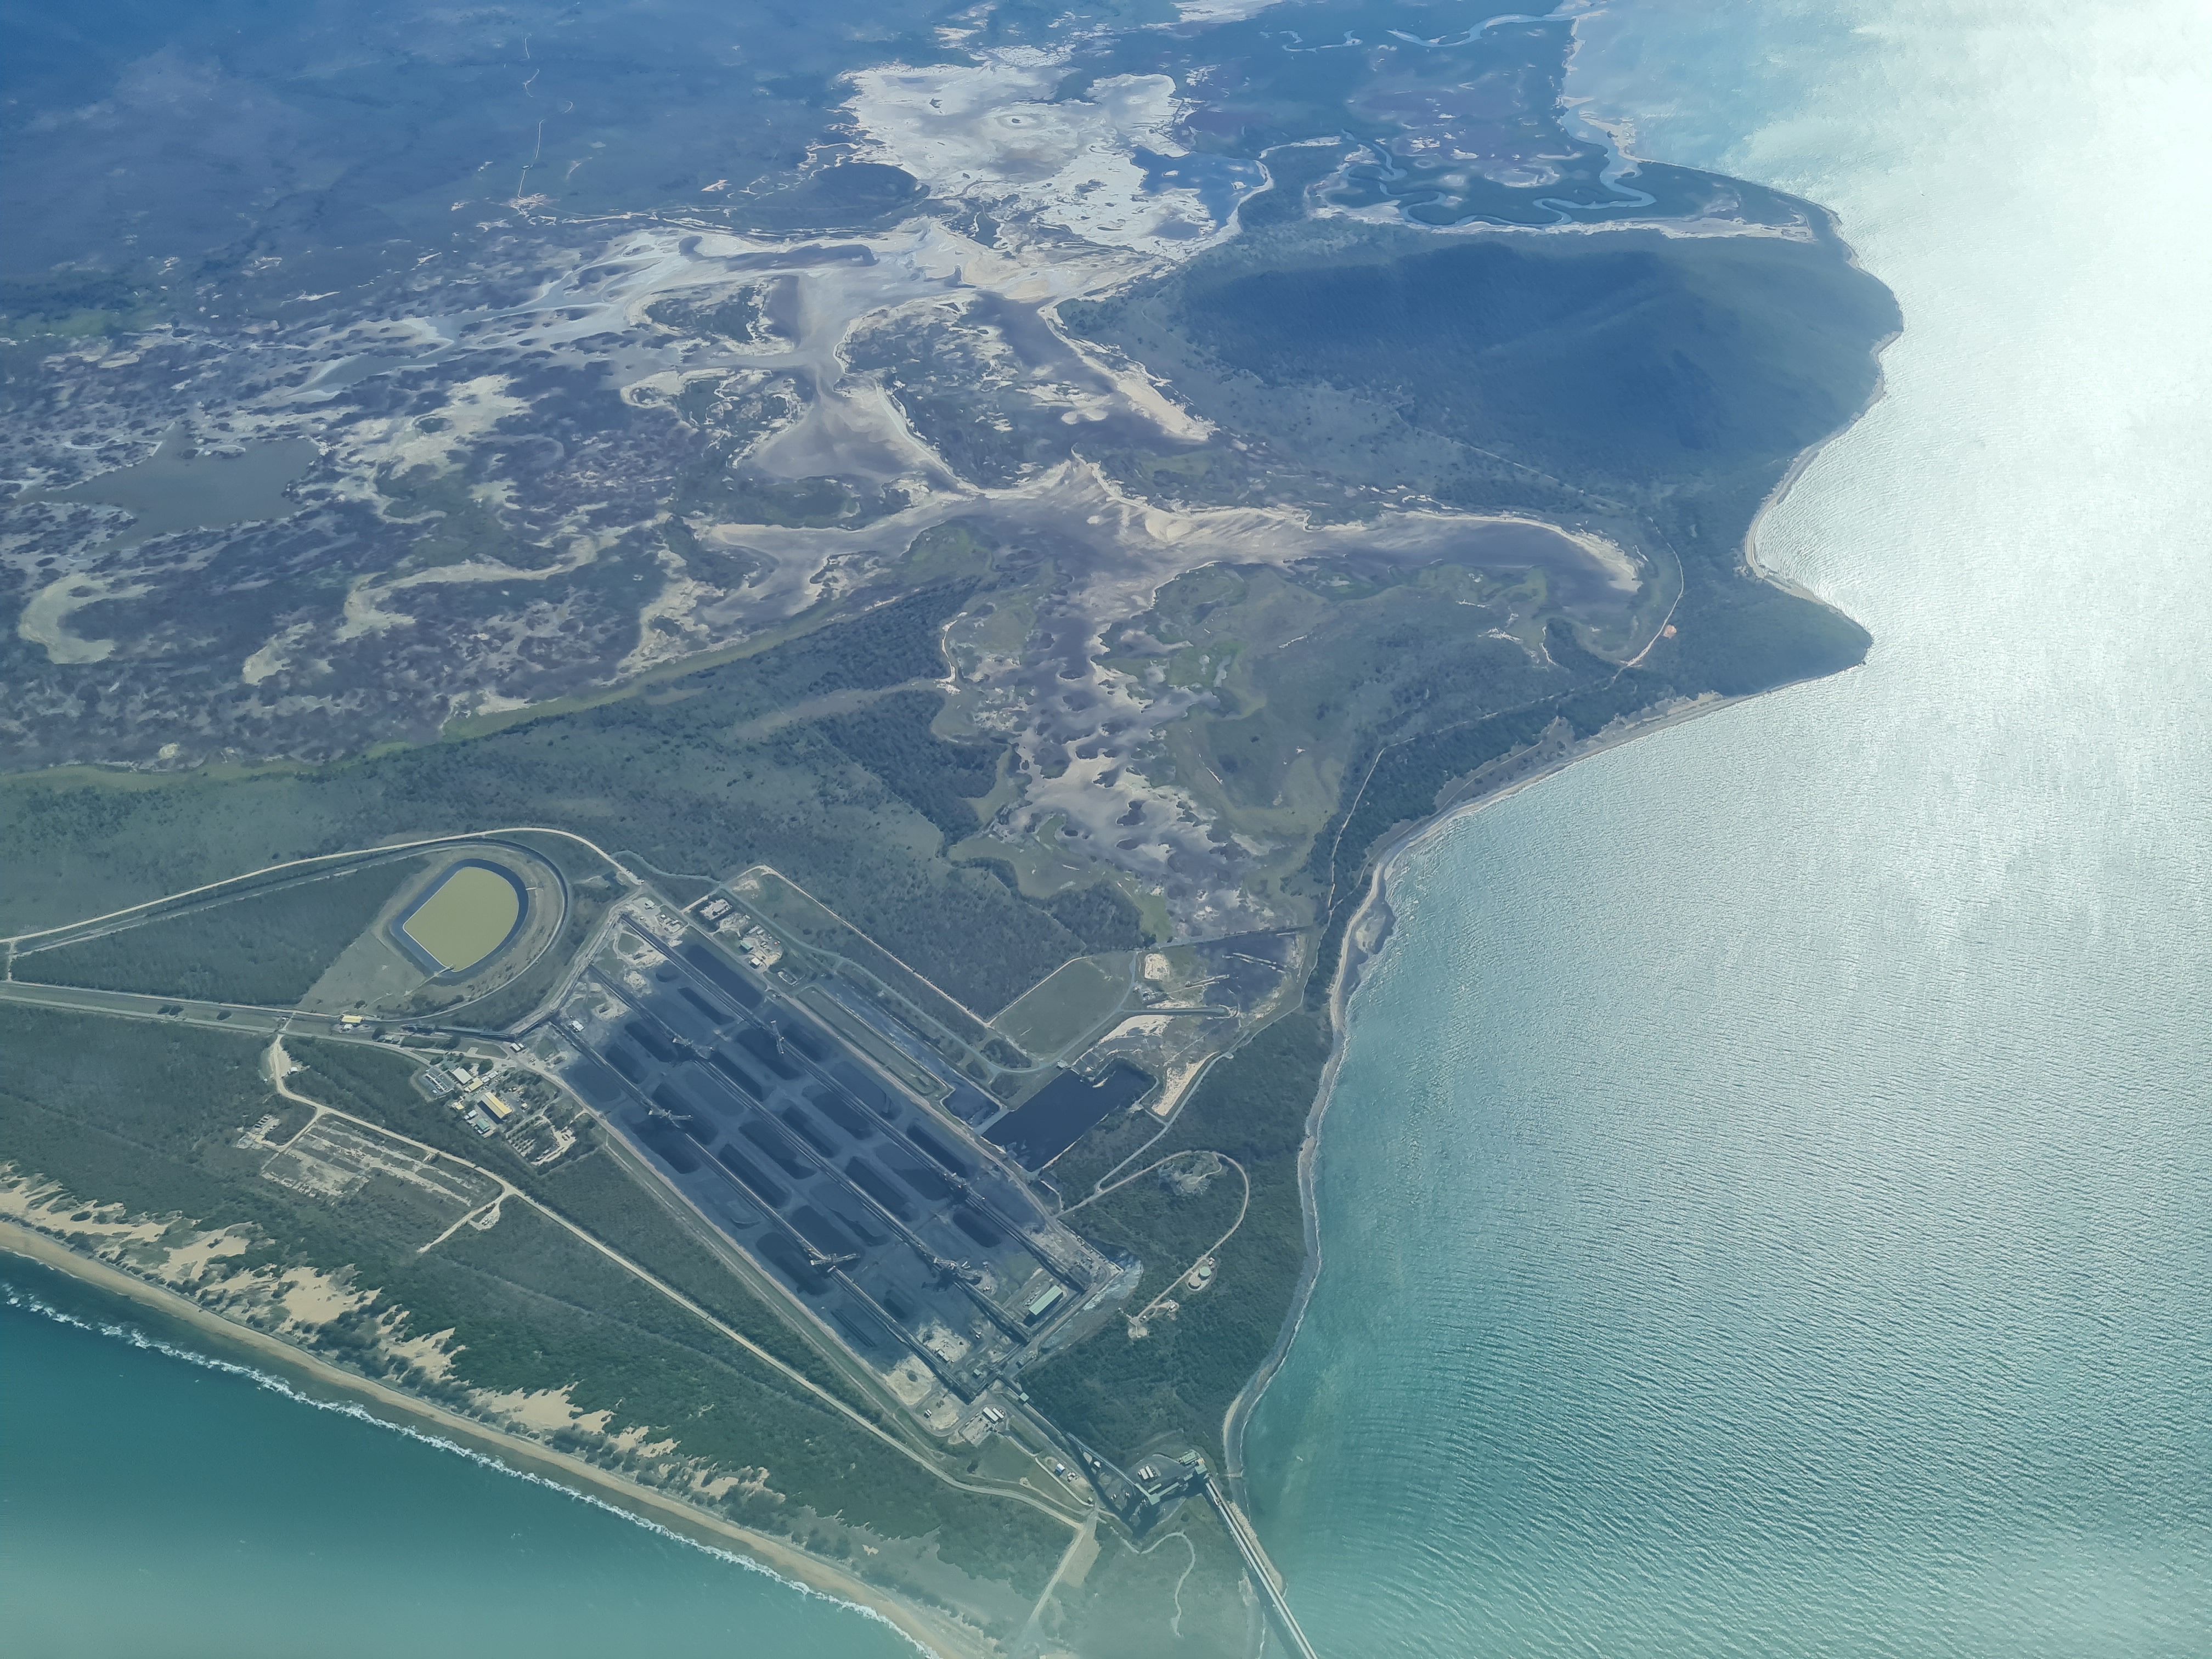 Flying over Abbot Point Coal Port and Cayley Valley wetlands on the way back to Proserpine.